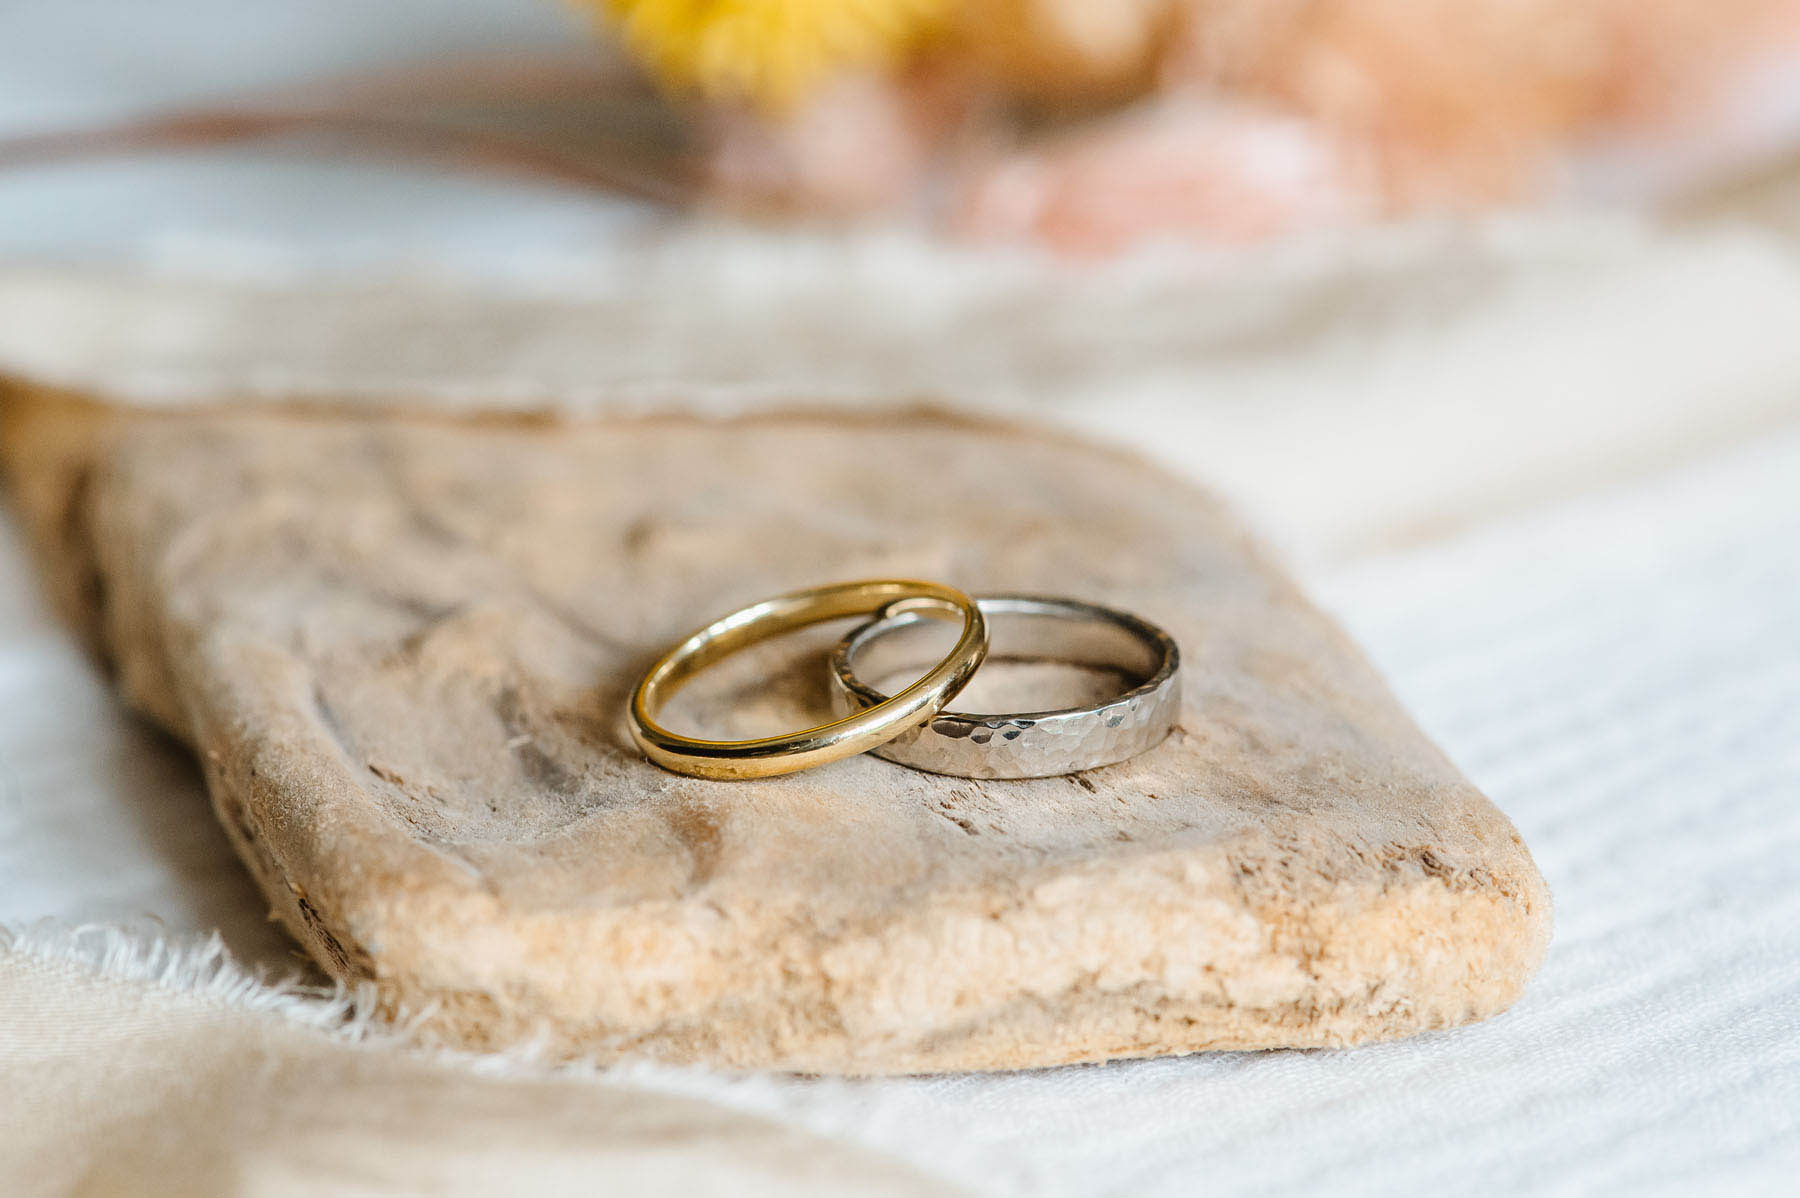 Recycled gold wedding rings by Nikki Stark.